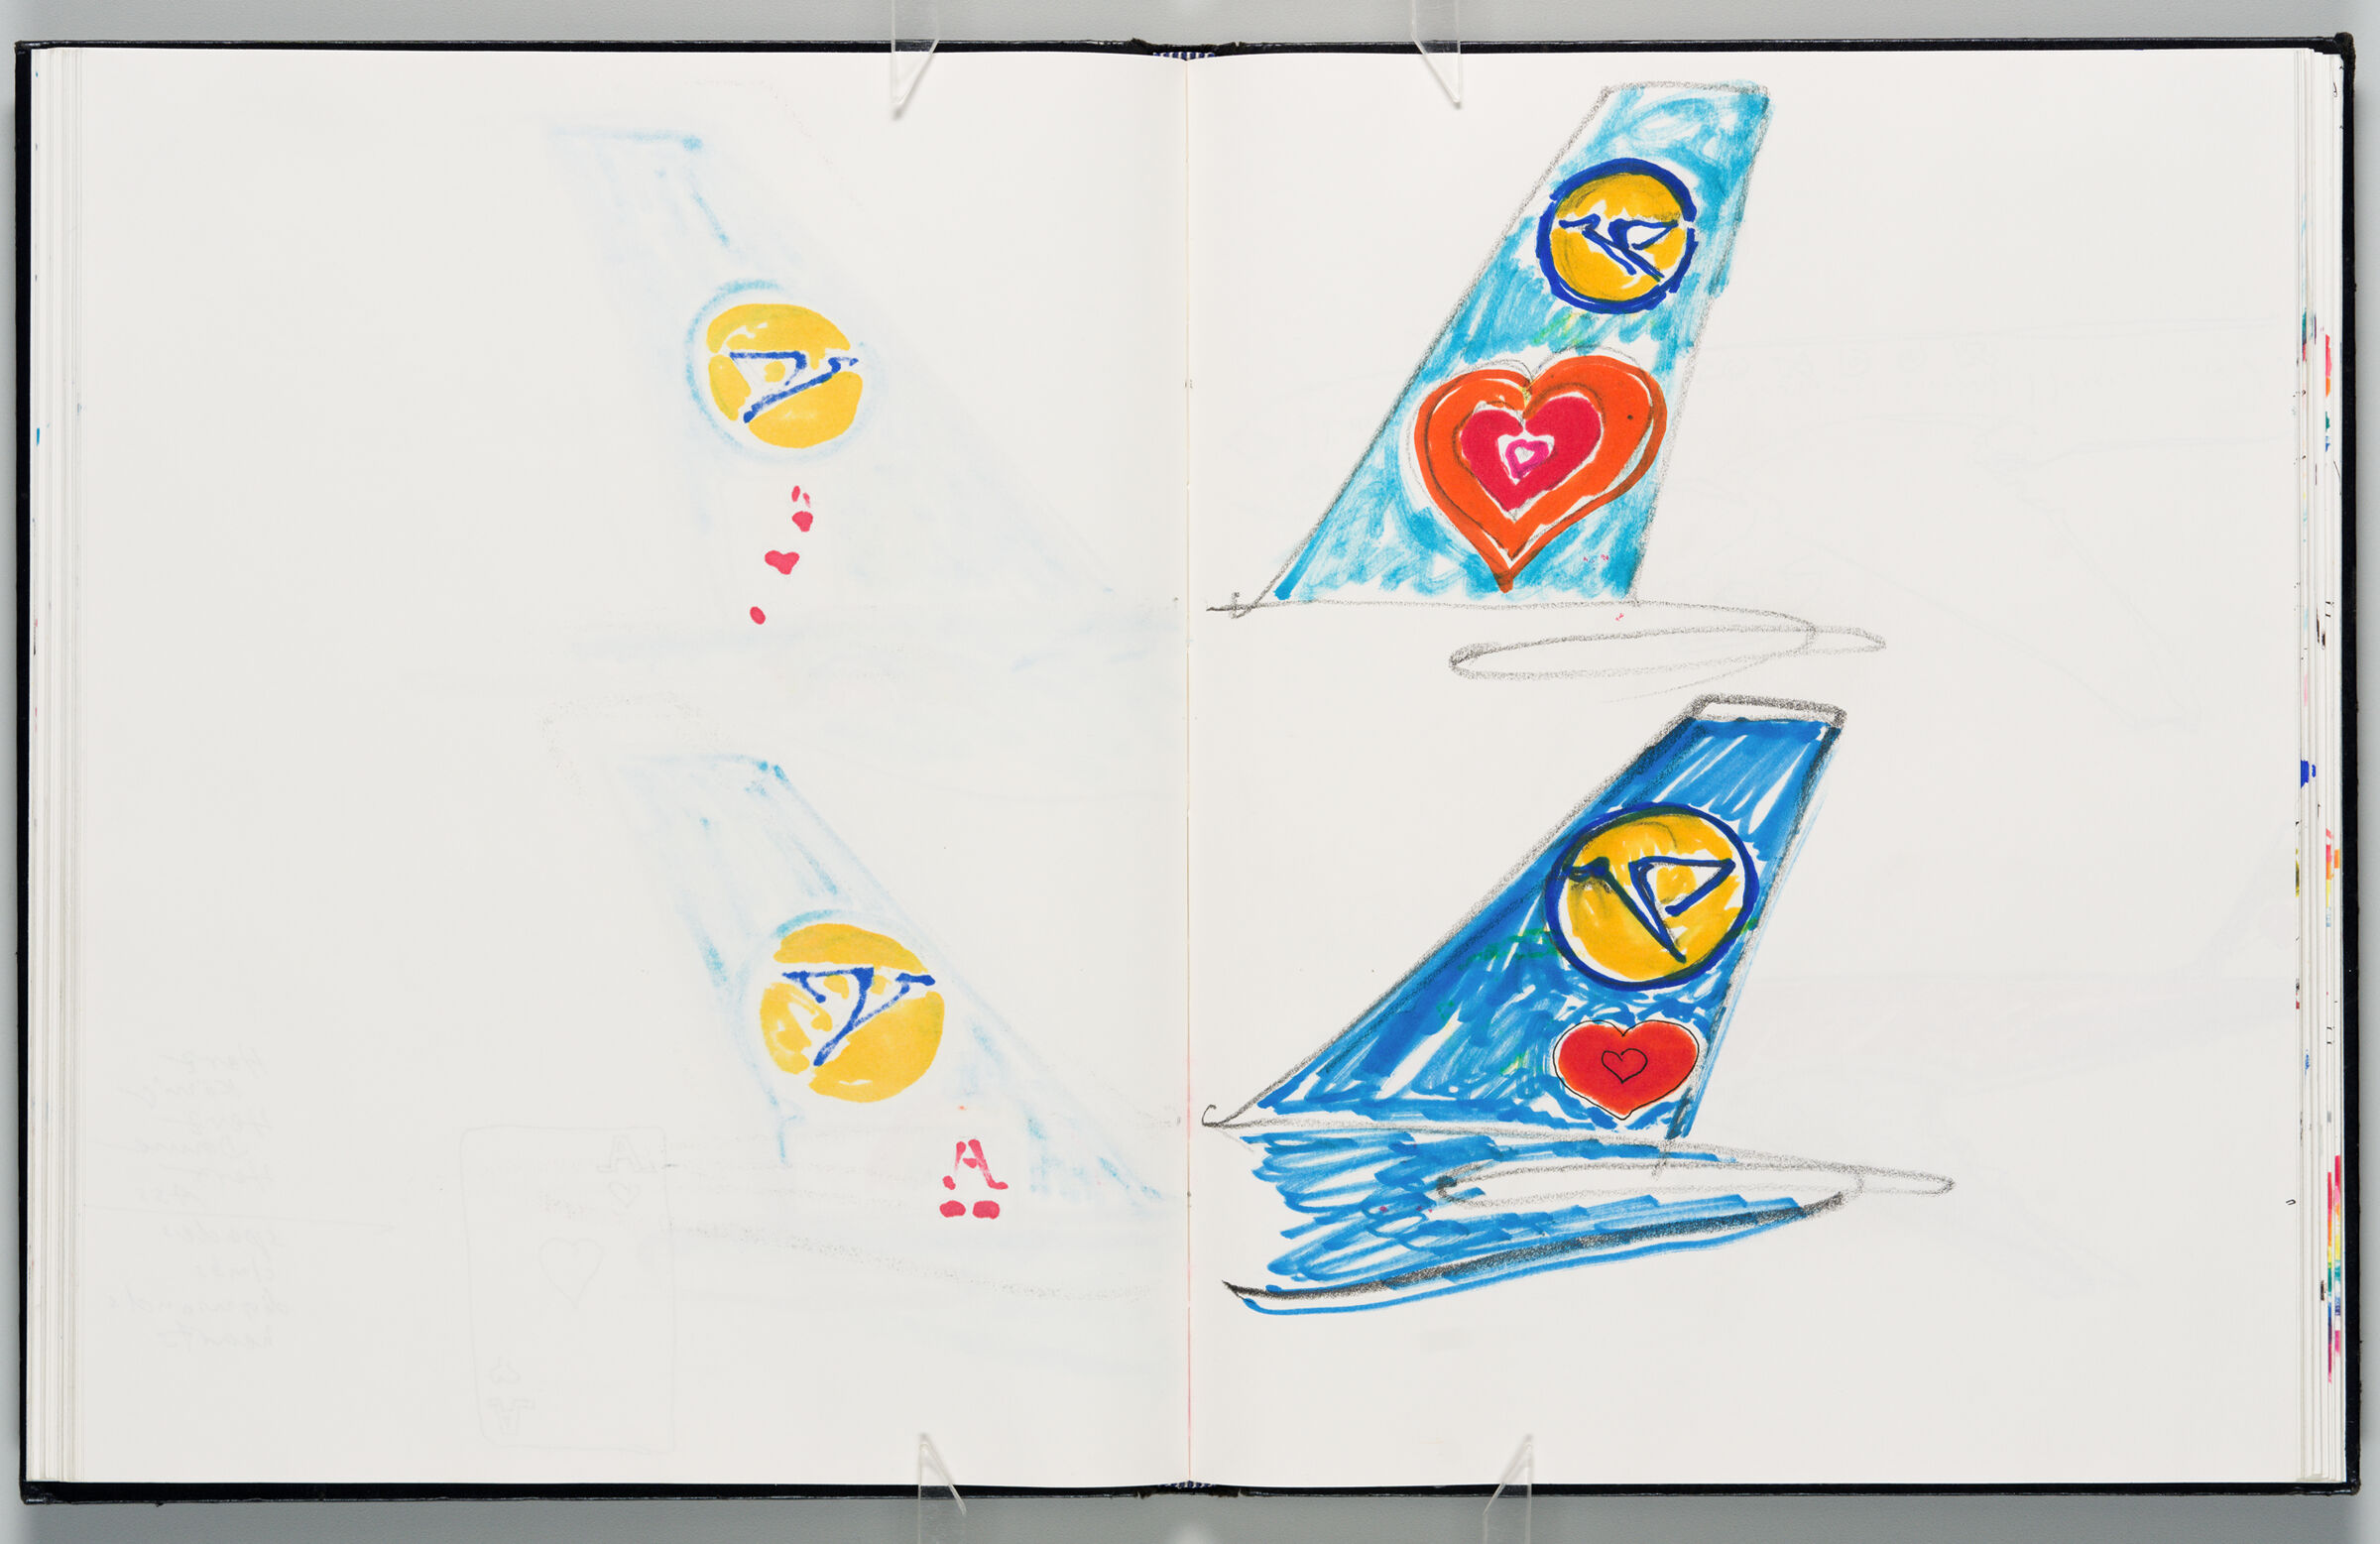 Untitled (Bleed-Through Of Previous Page, Left Page); Untitled (Heart Designs For Condor Planes, Right Page)